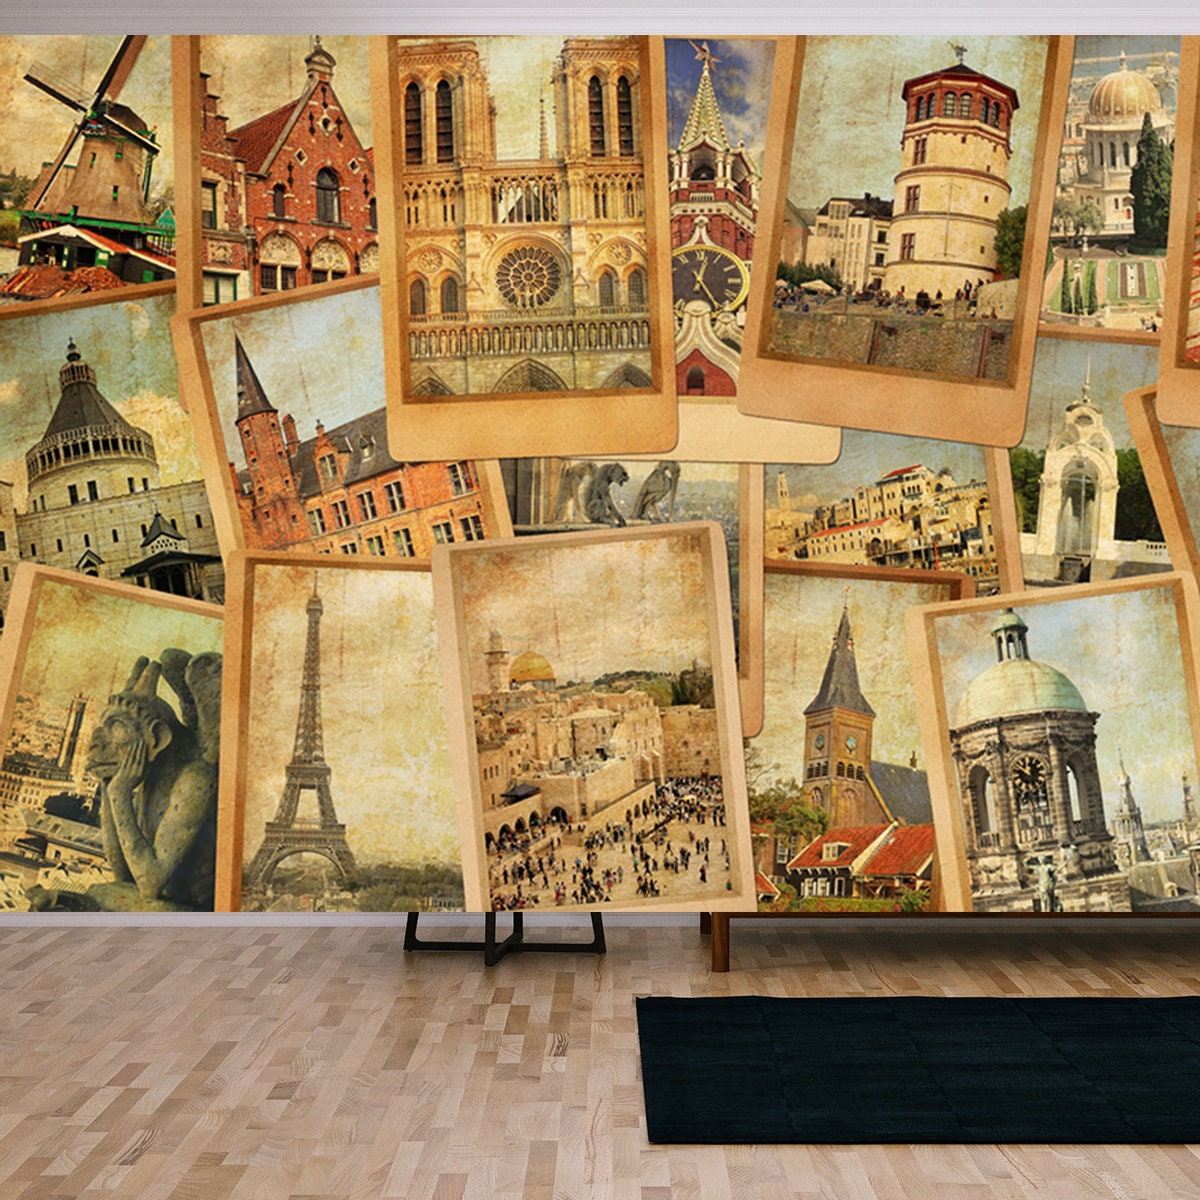 Vintage Photo Cards Collage. European, Middle East, Canada and Russia Travel. World Tourism Concept Wallpaper Living Room Mural